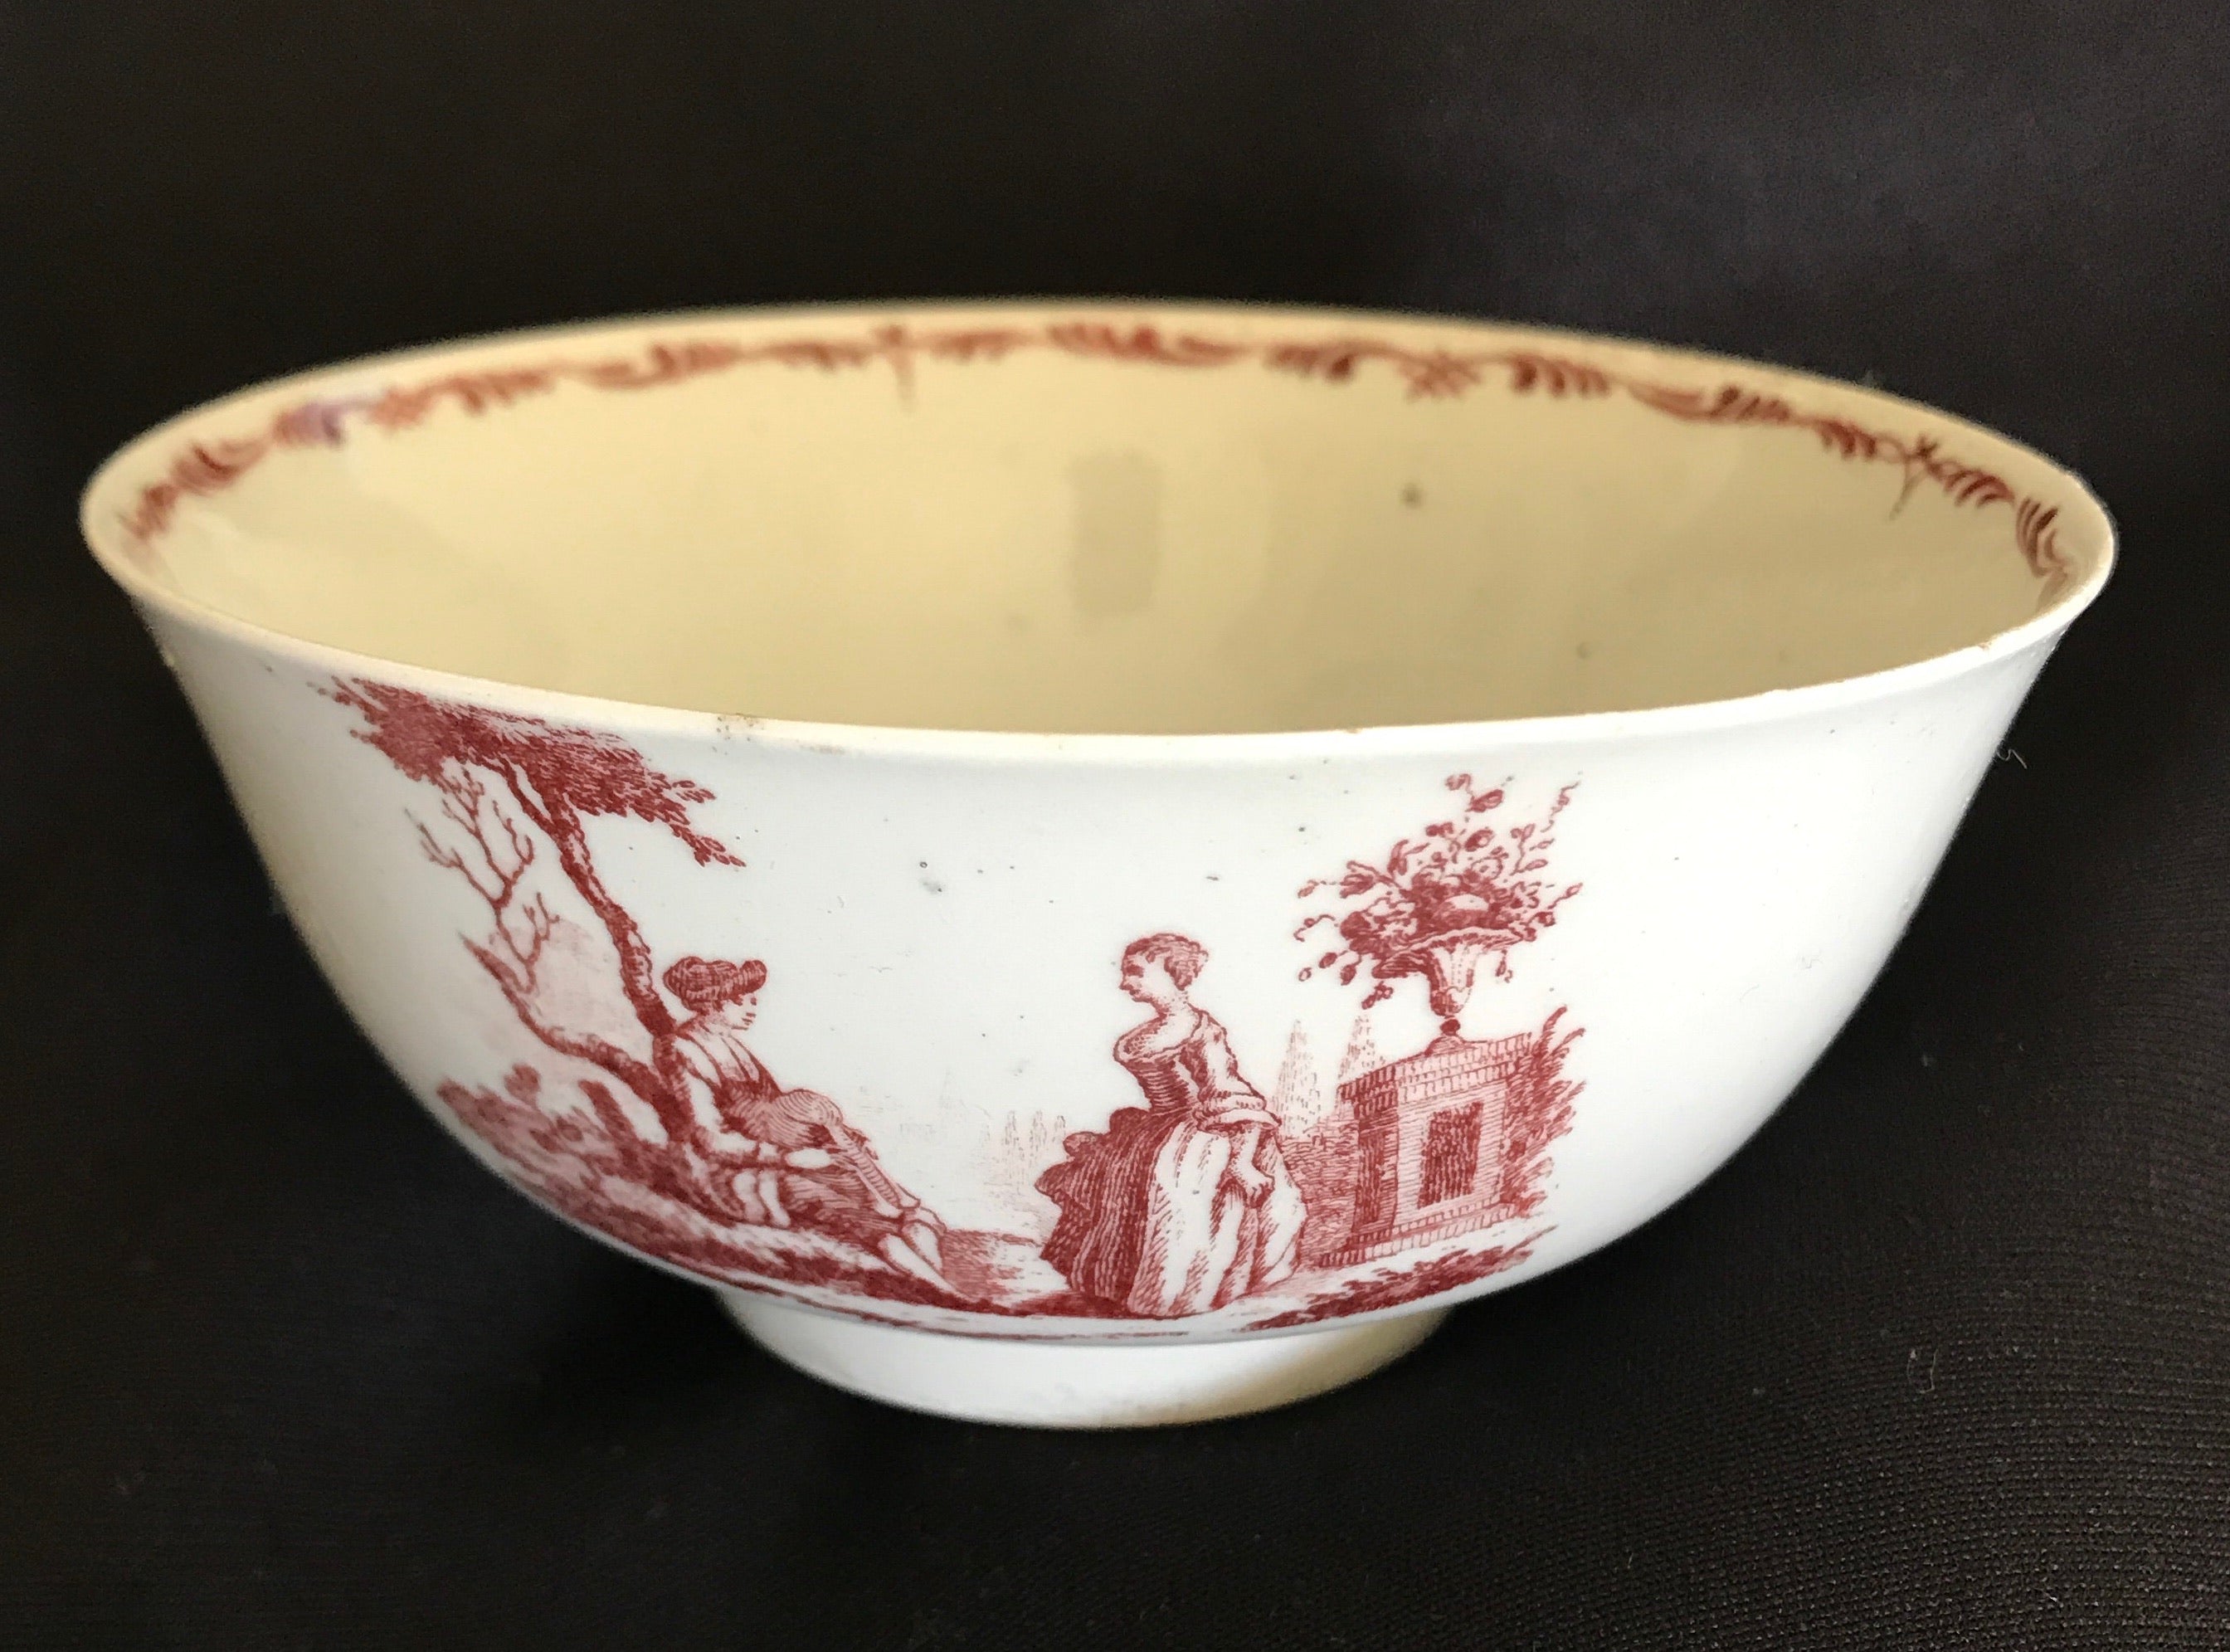 SOLD 18th Century Worcester Porcelain Bowl Transfer-Printed in Red.